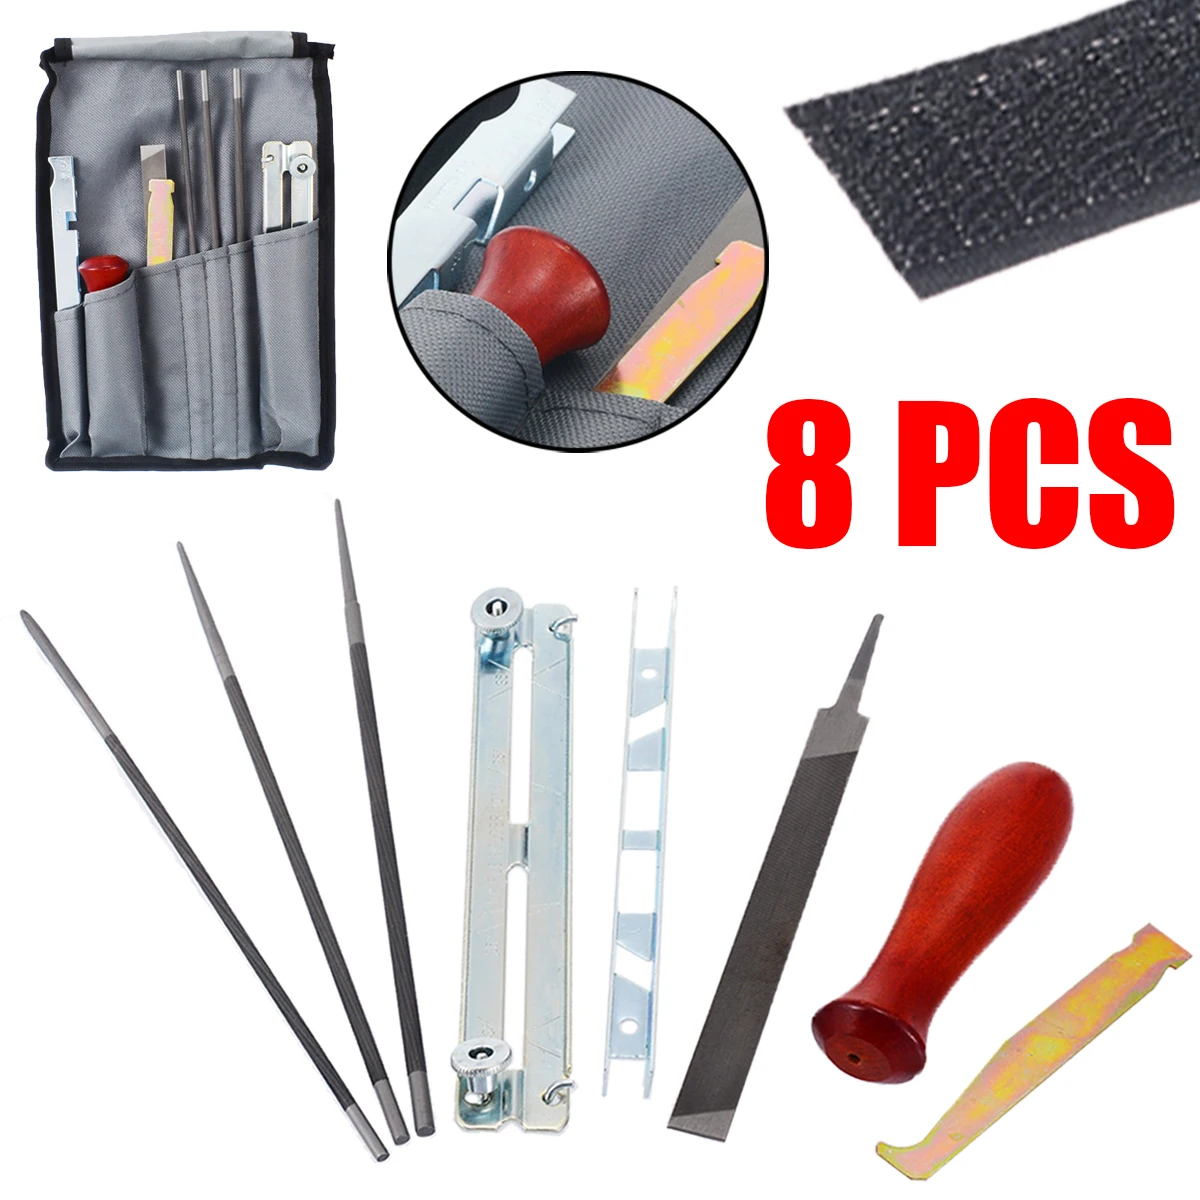 8PCS/lot Chain Saw Sharpening Kit Guide Bar File Instruction Chainsaw File Tool Set Garden Tool Part